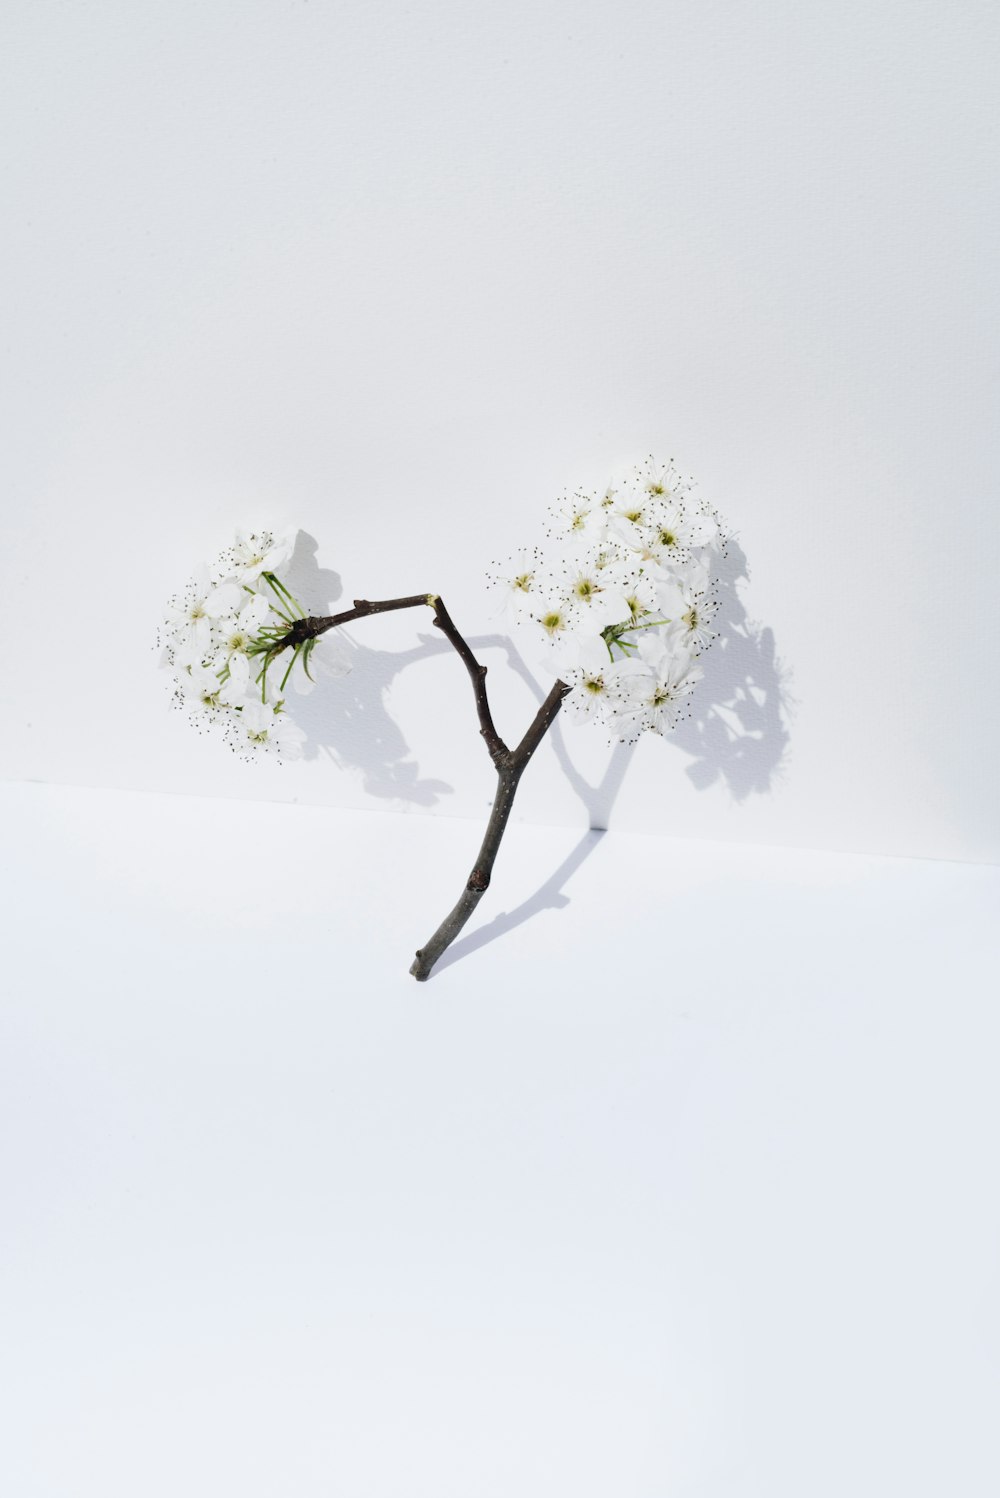 a branch with flowers on it